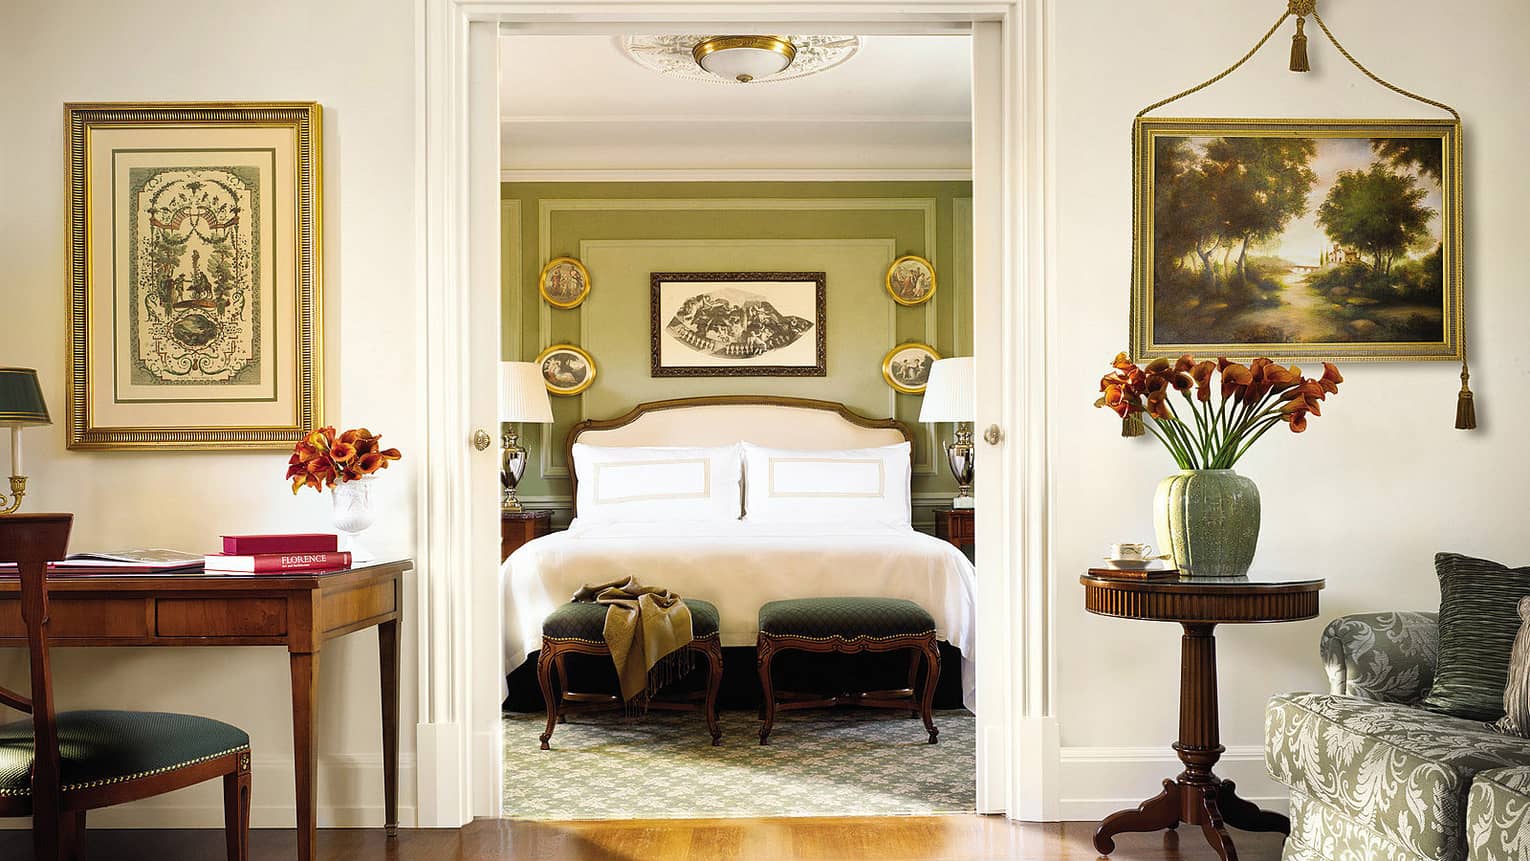 Four Seasons Executive Suite desk, chair by bedroom doorway, bed and scarf across green footstools